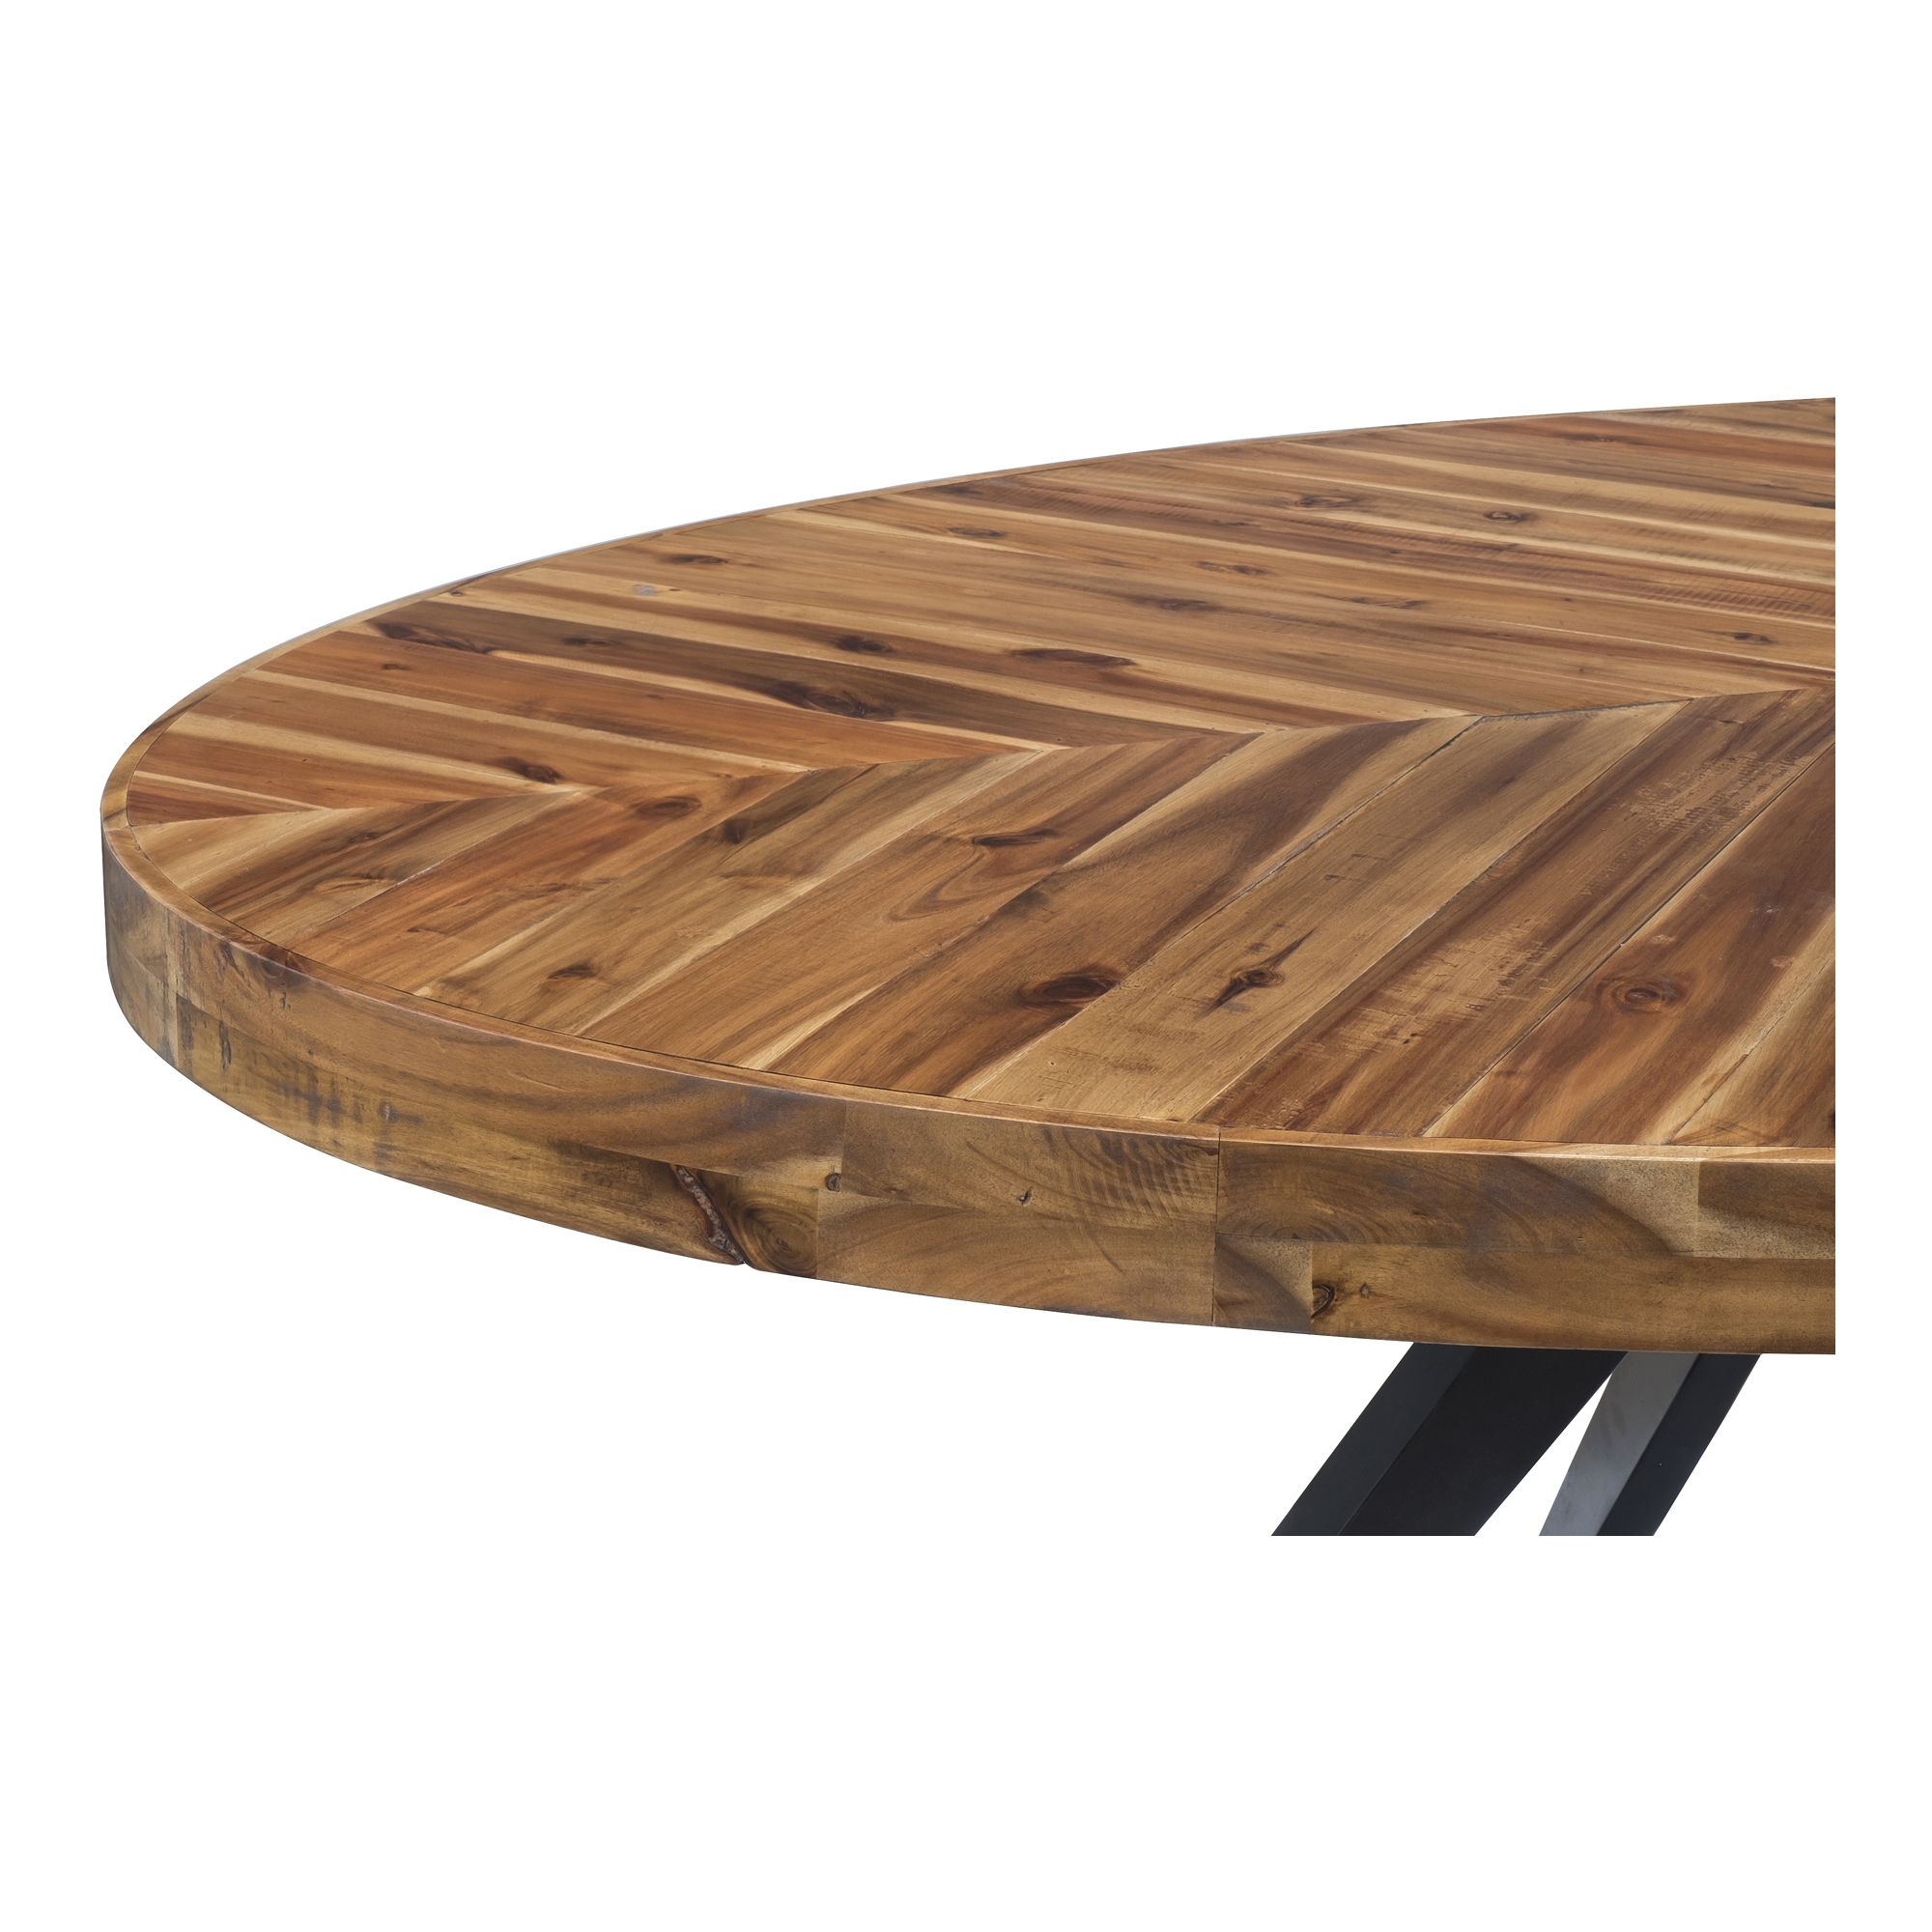 PARQ OVAL DINING TABLE AMBER - Image 3